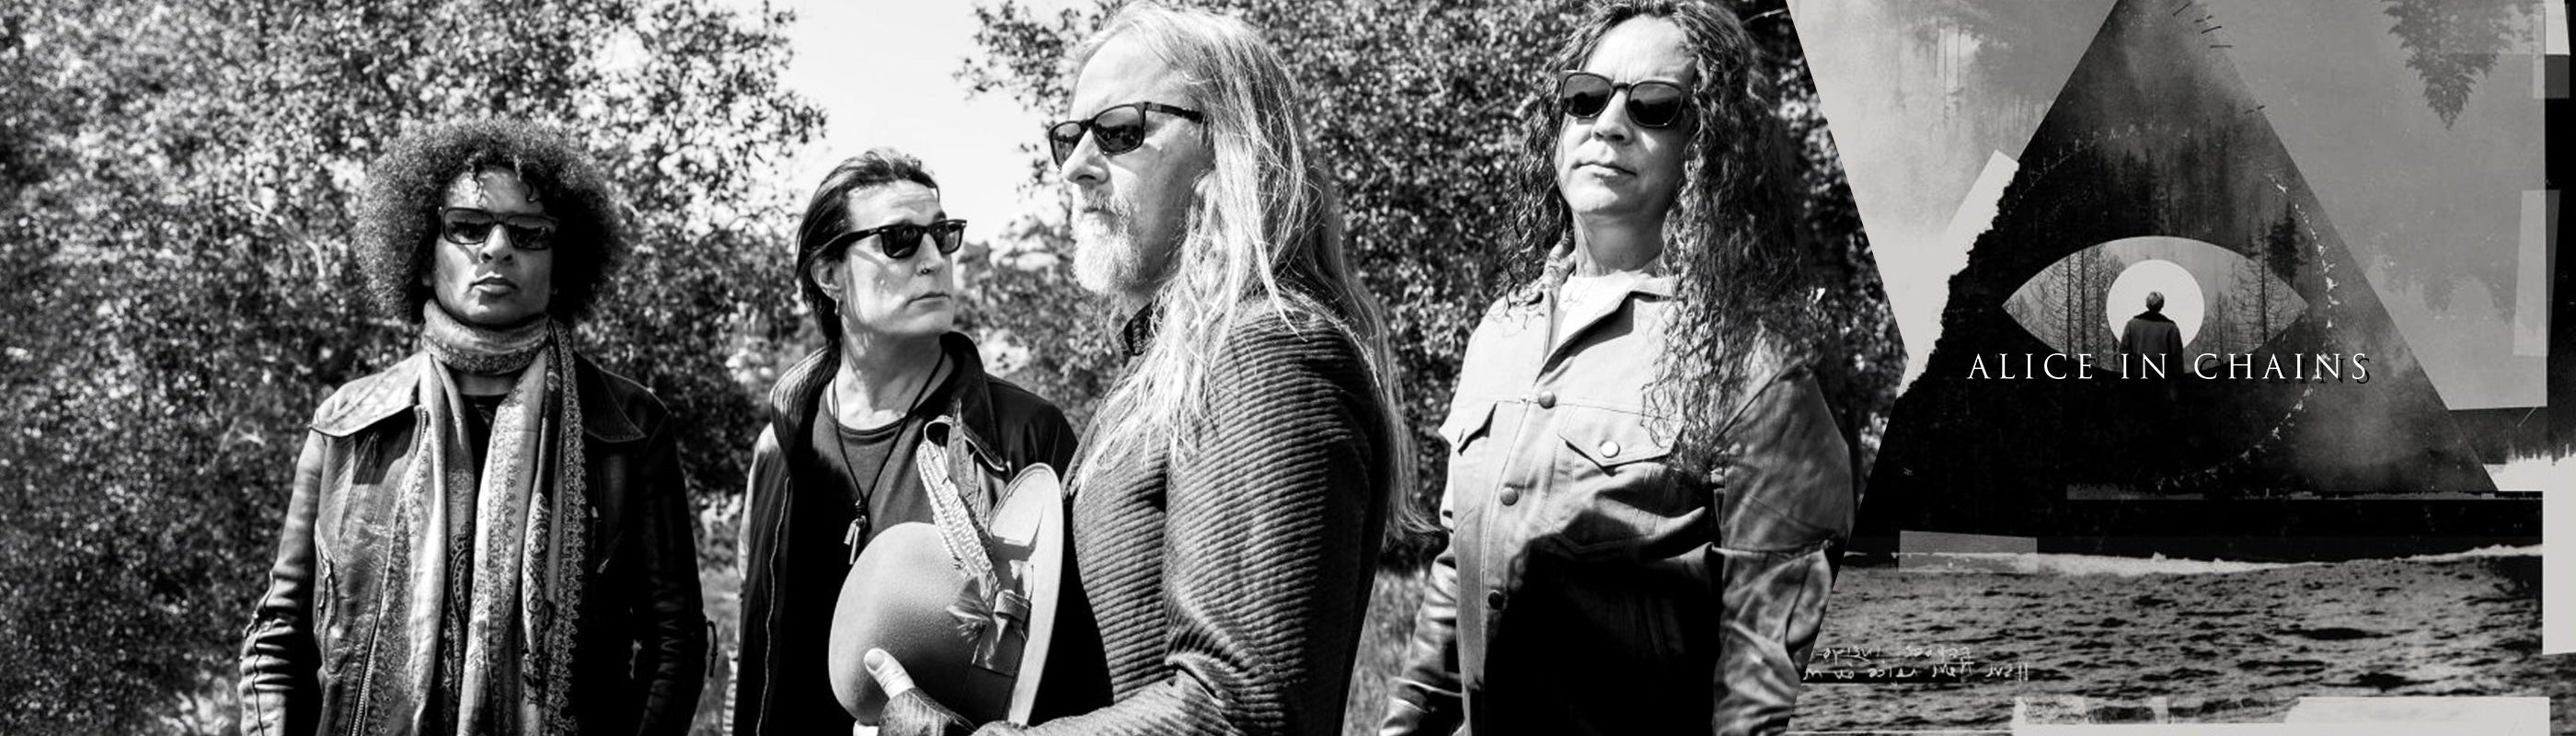 Alice In Chains - Header